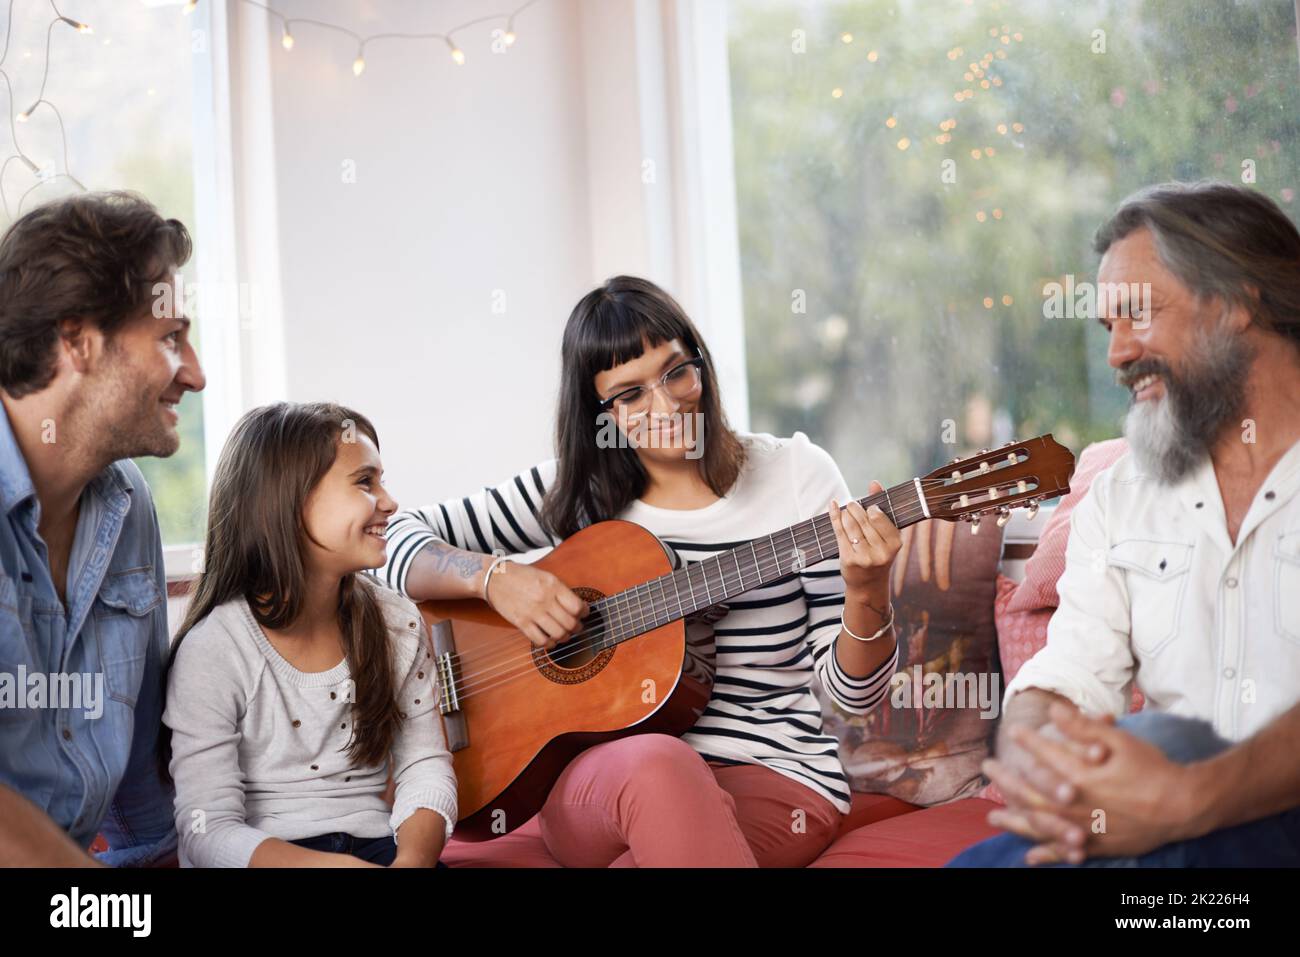 Family fun with the guitar. a woman playing the guitar while sitting with her family. Stock Photo